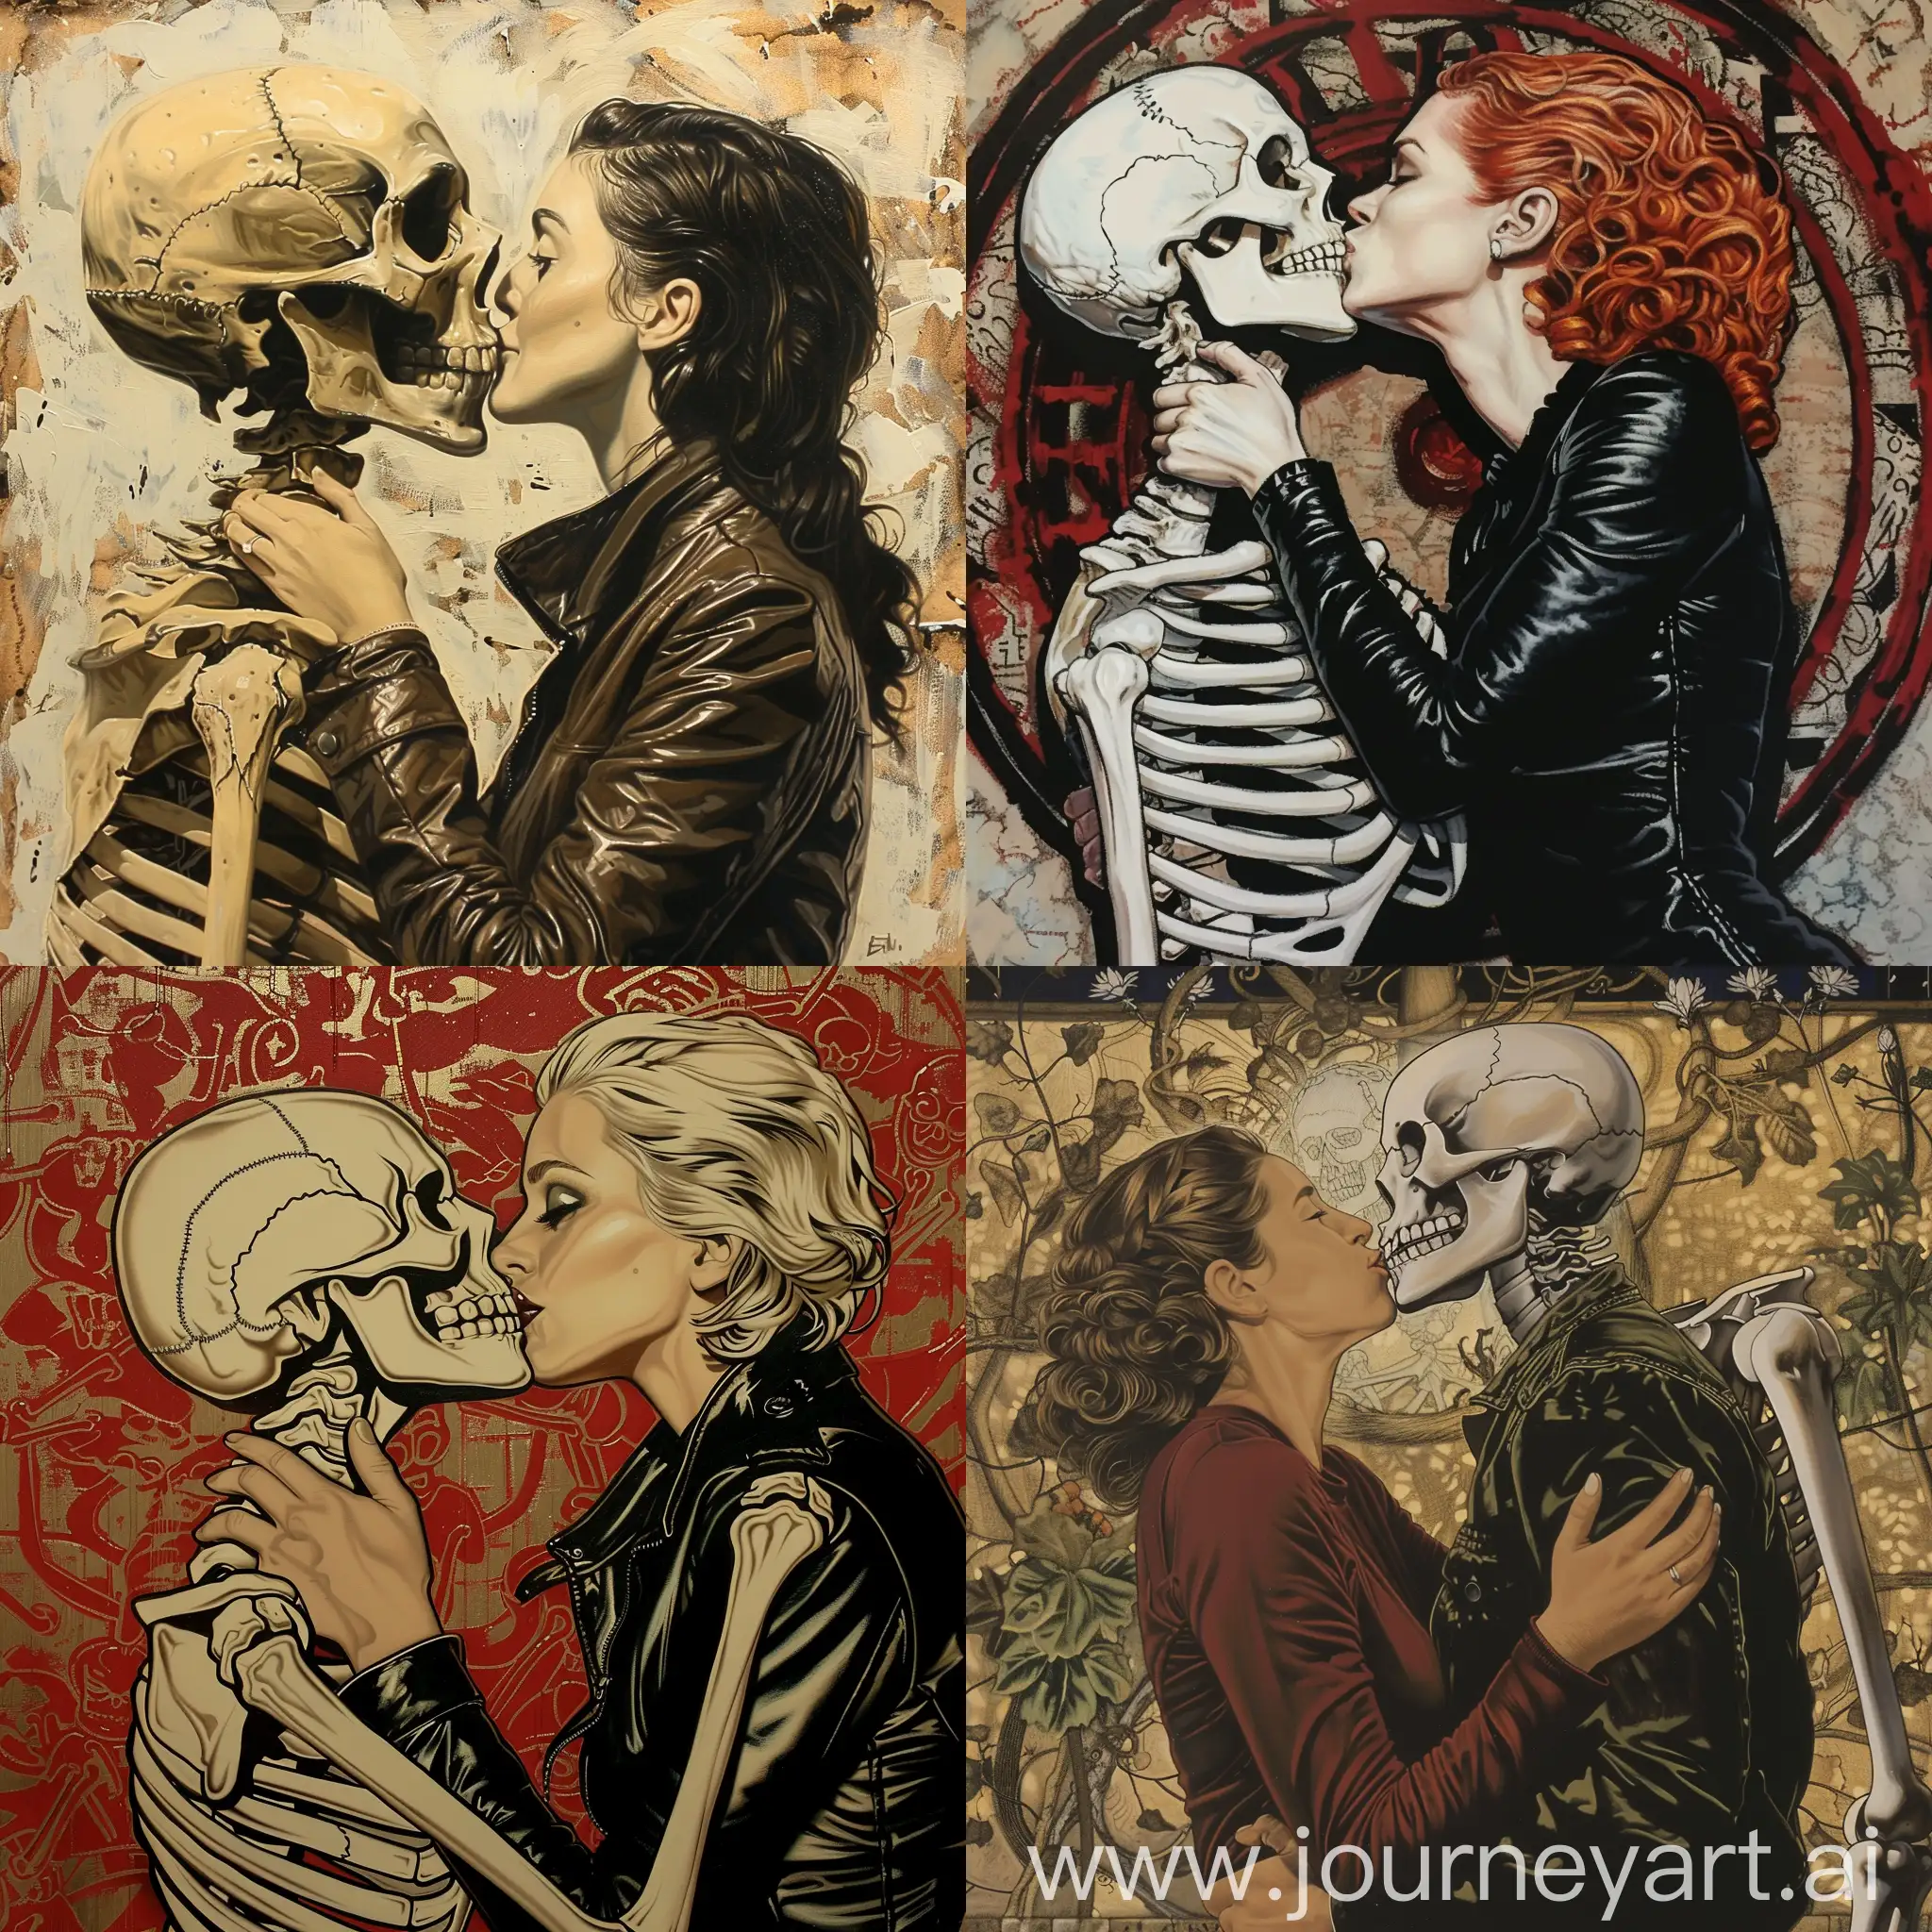 Woman-Kissing-Skeleton-in-Dave-McKean-Inspired-Comic-Art-Style